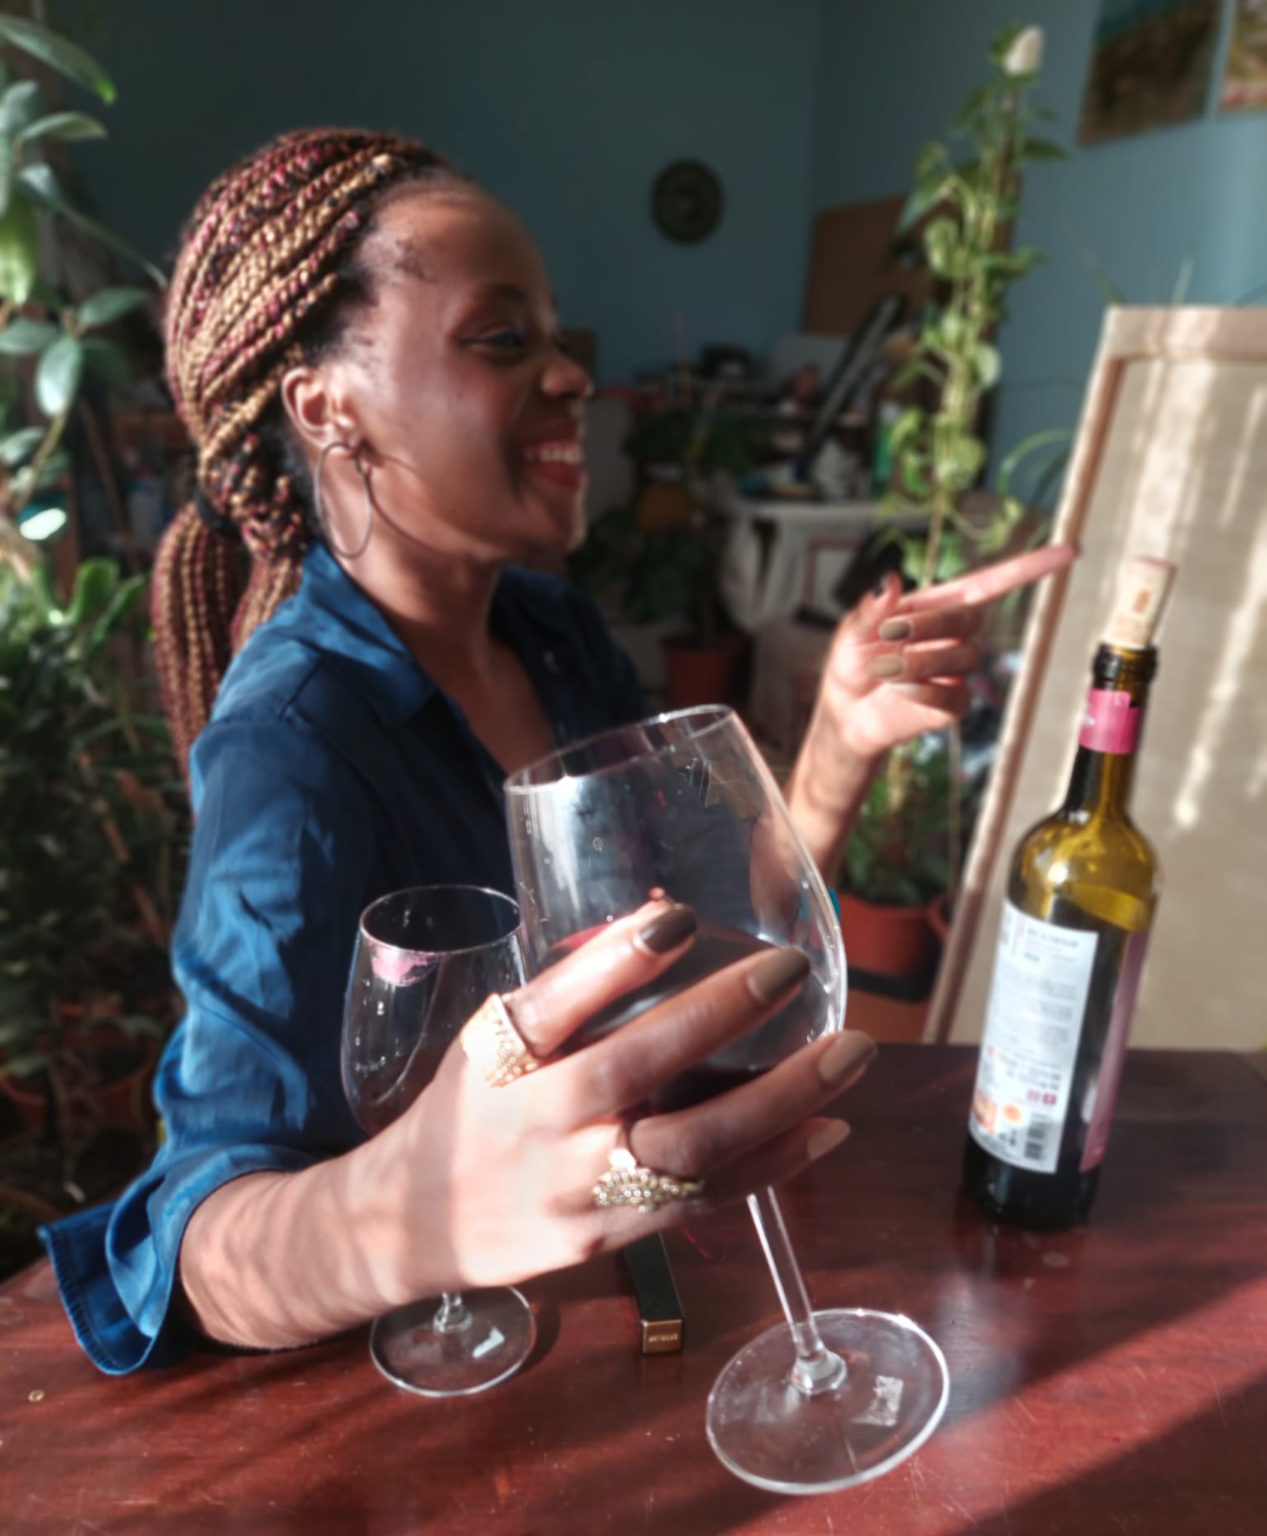 woman is holding a wine glass while laughing